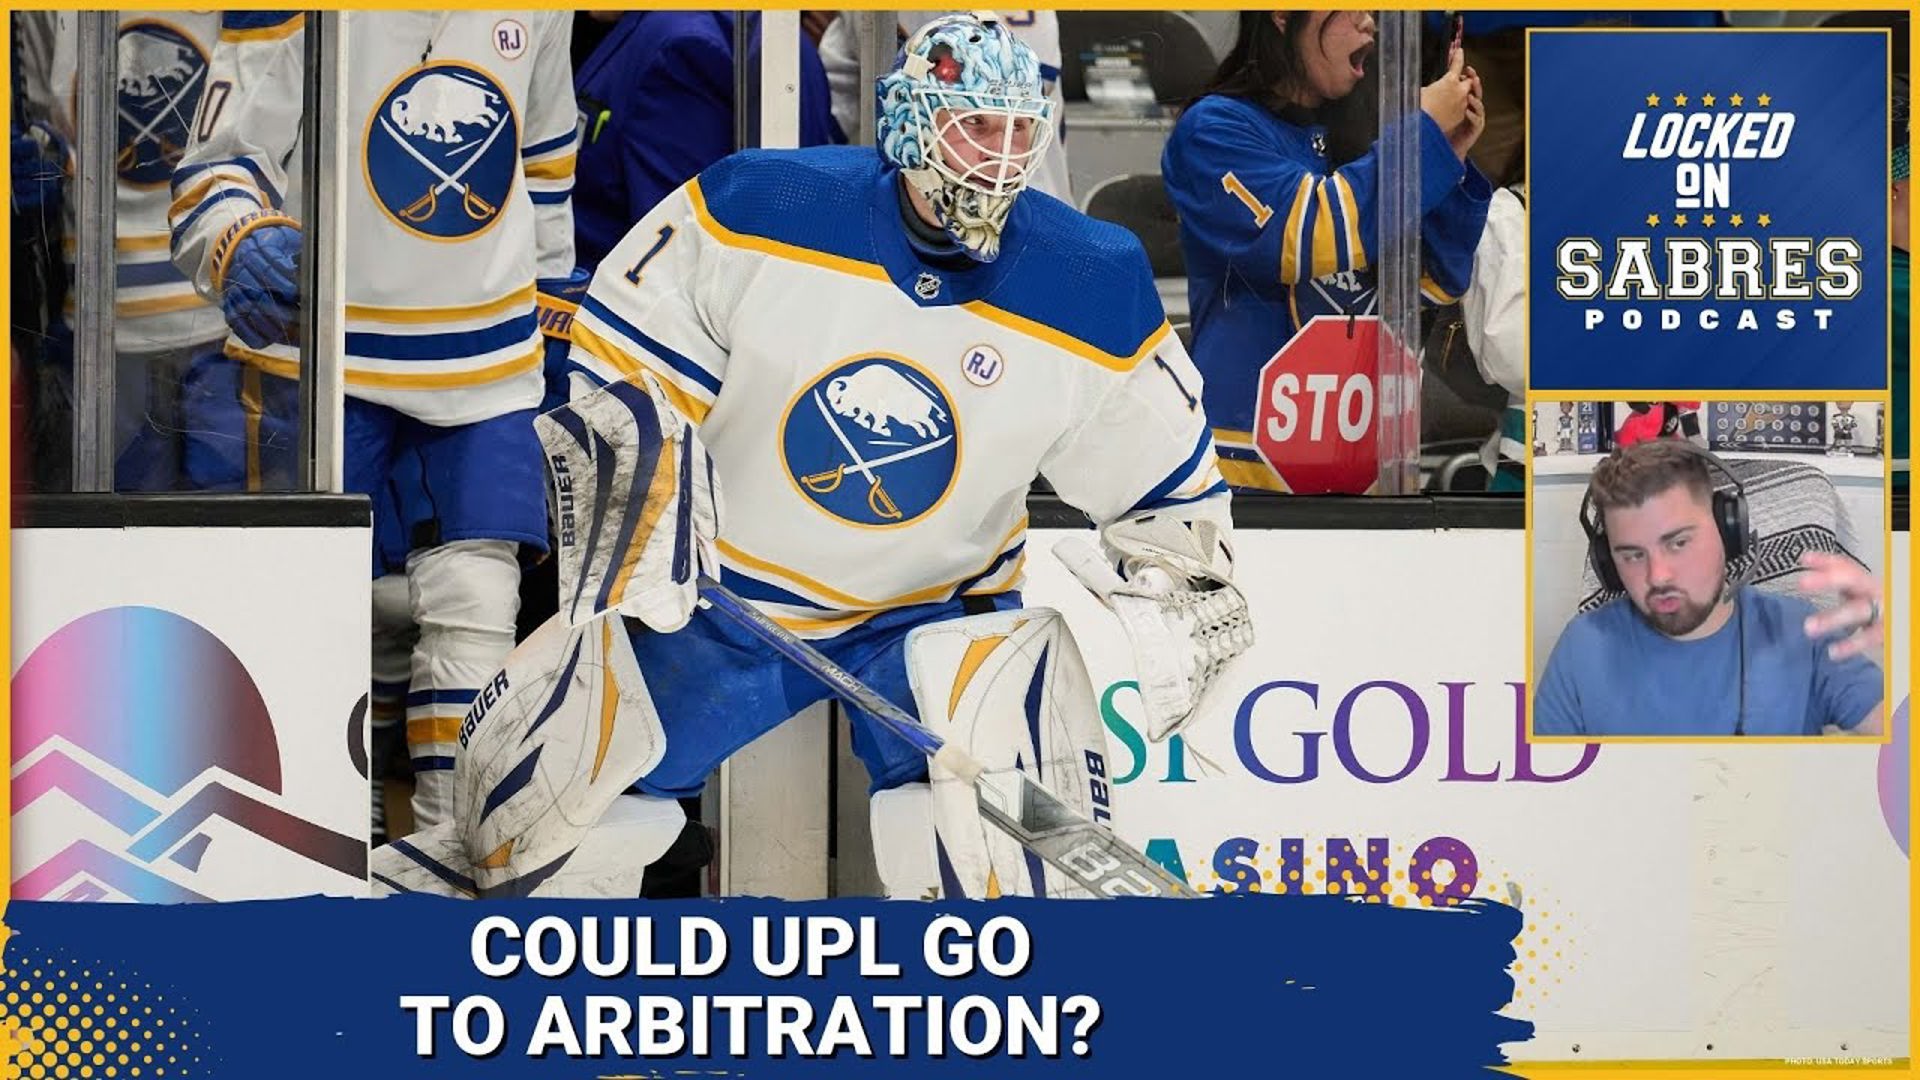 Could Luukkonen go to arbitration with the Sabres?